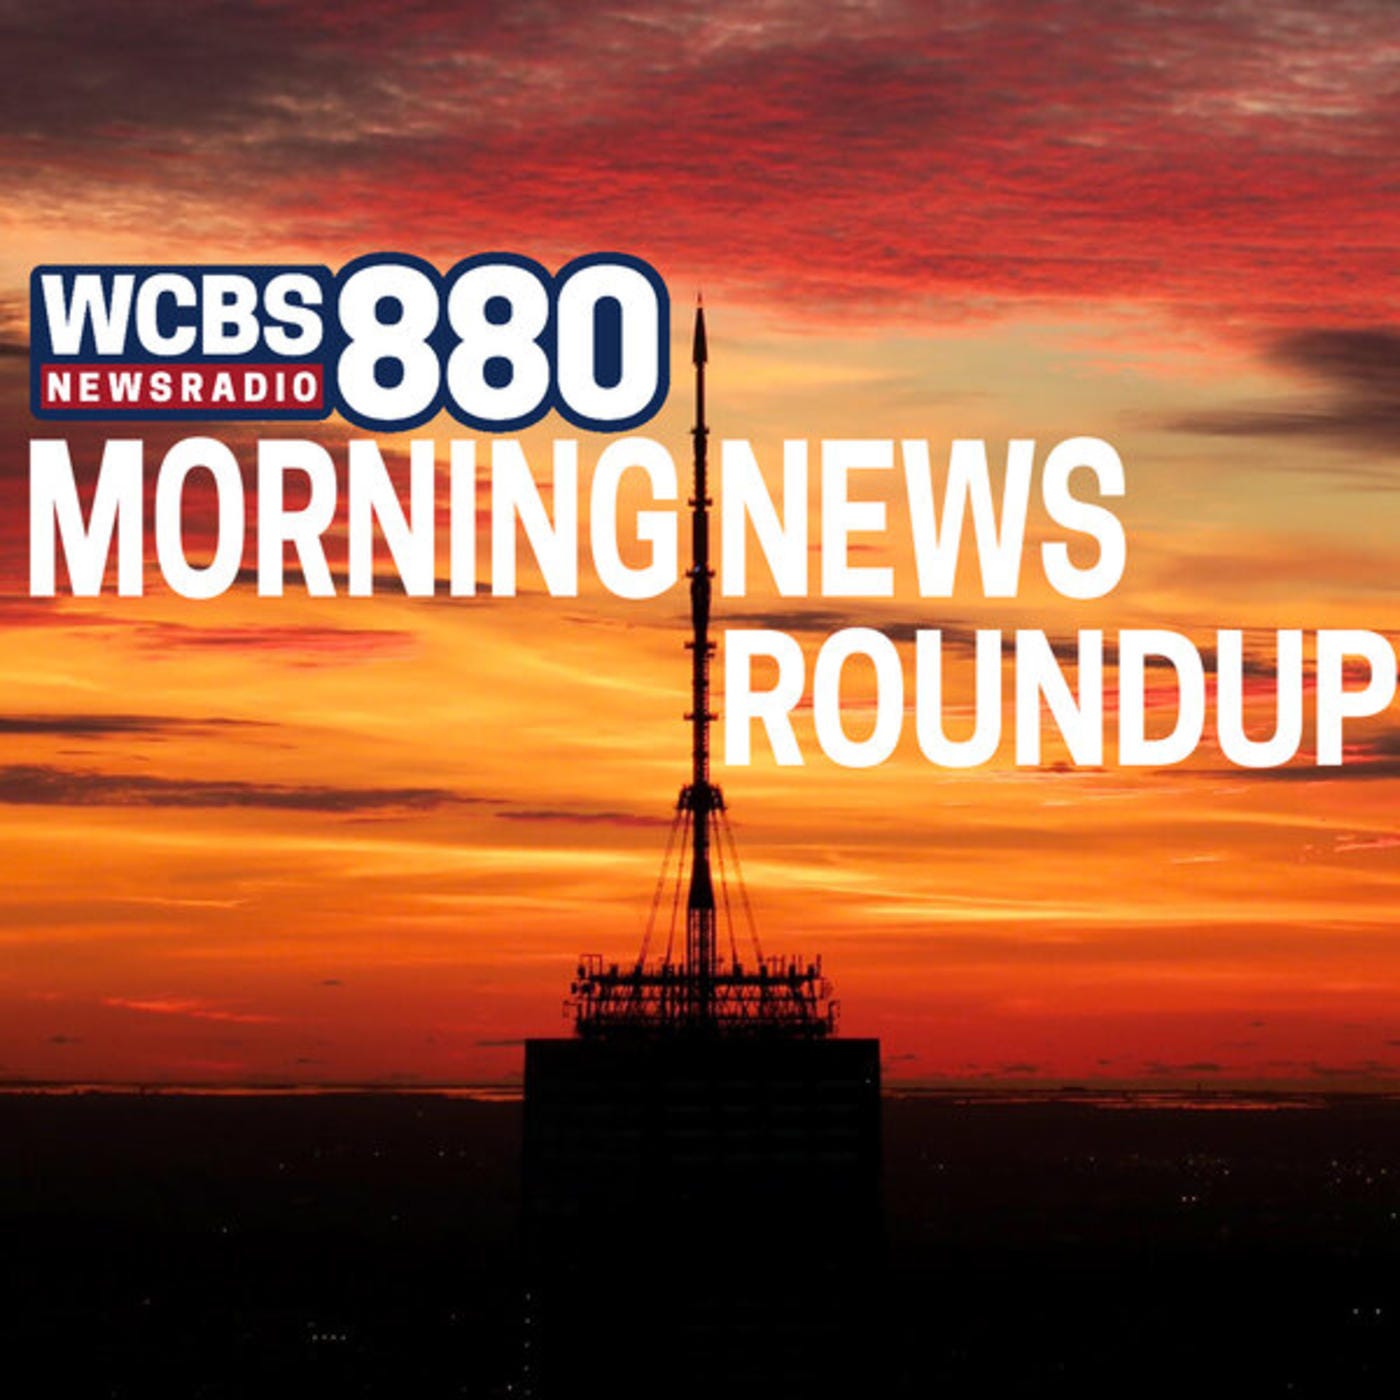 WCBS 880 Morning News Roundup - Friday, February 3rd, 2023